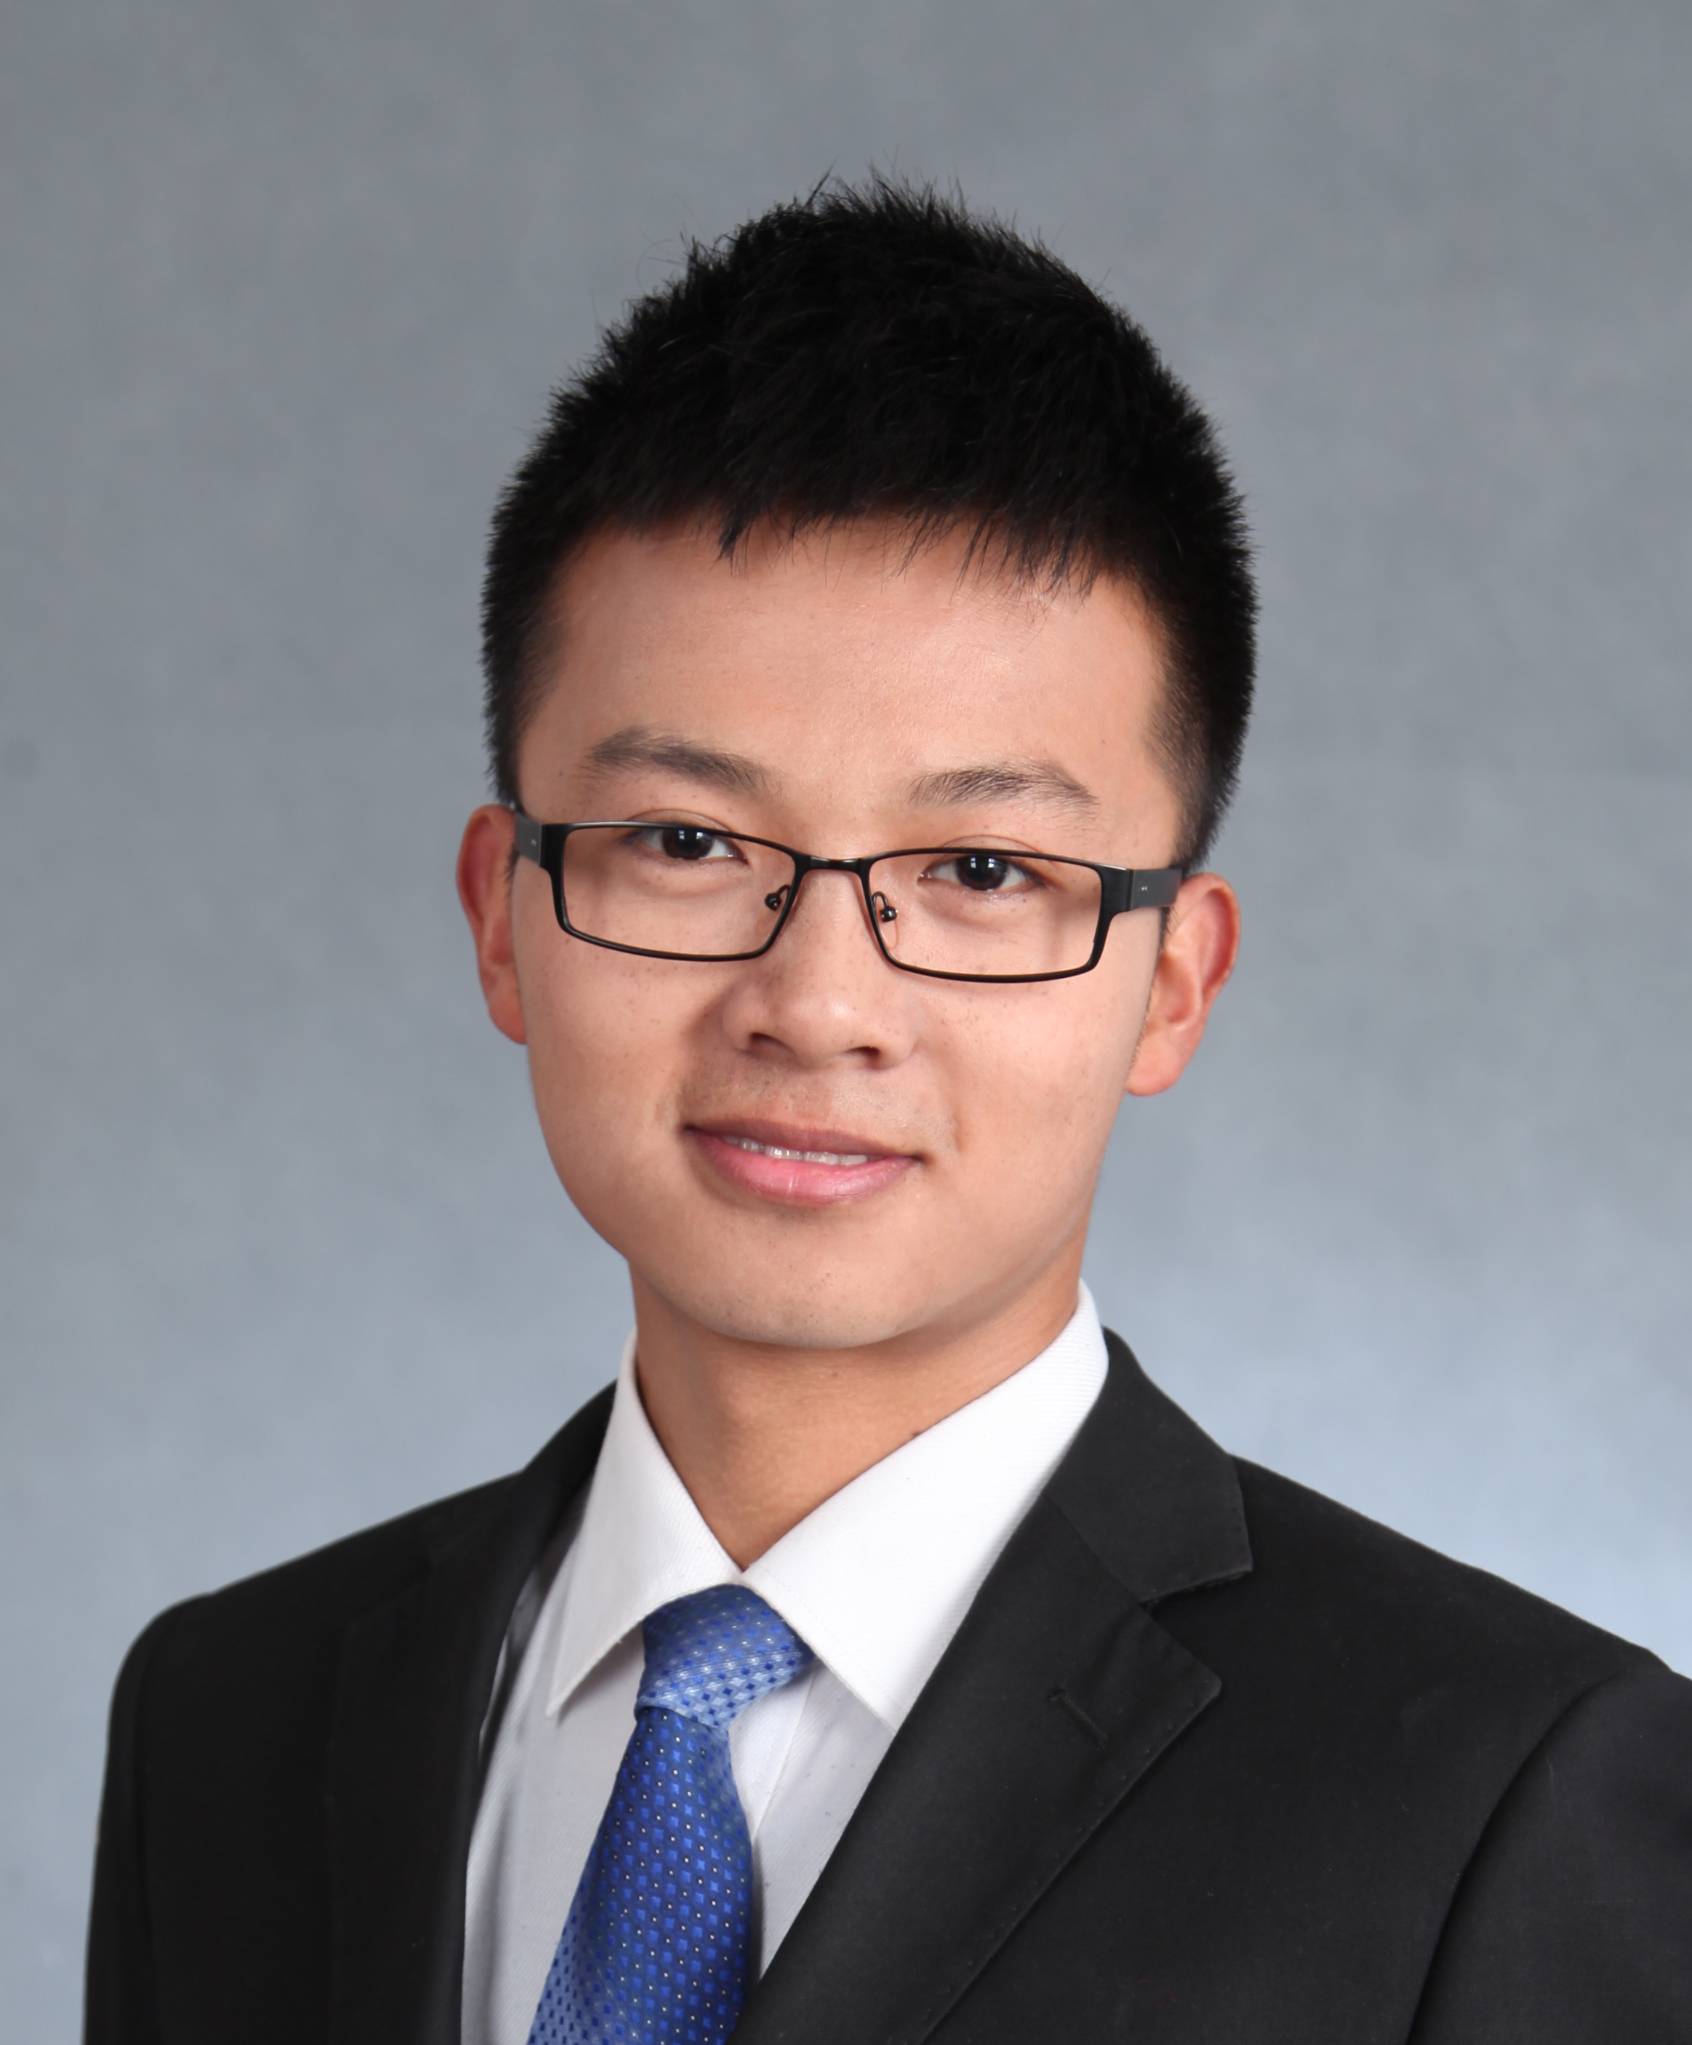 Xiao Xu's paper is accepted by EES. Well Done!